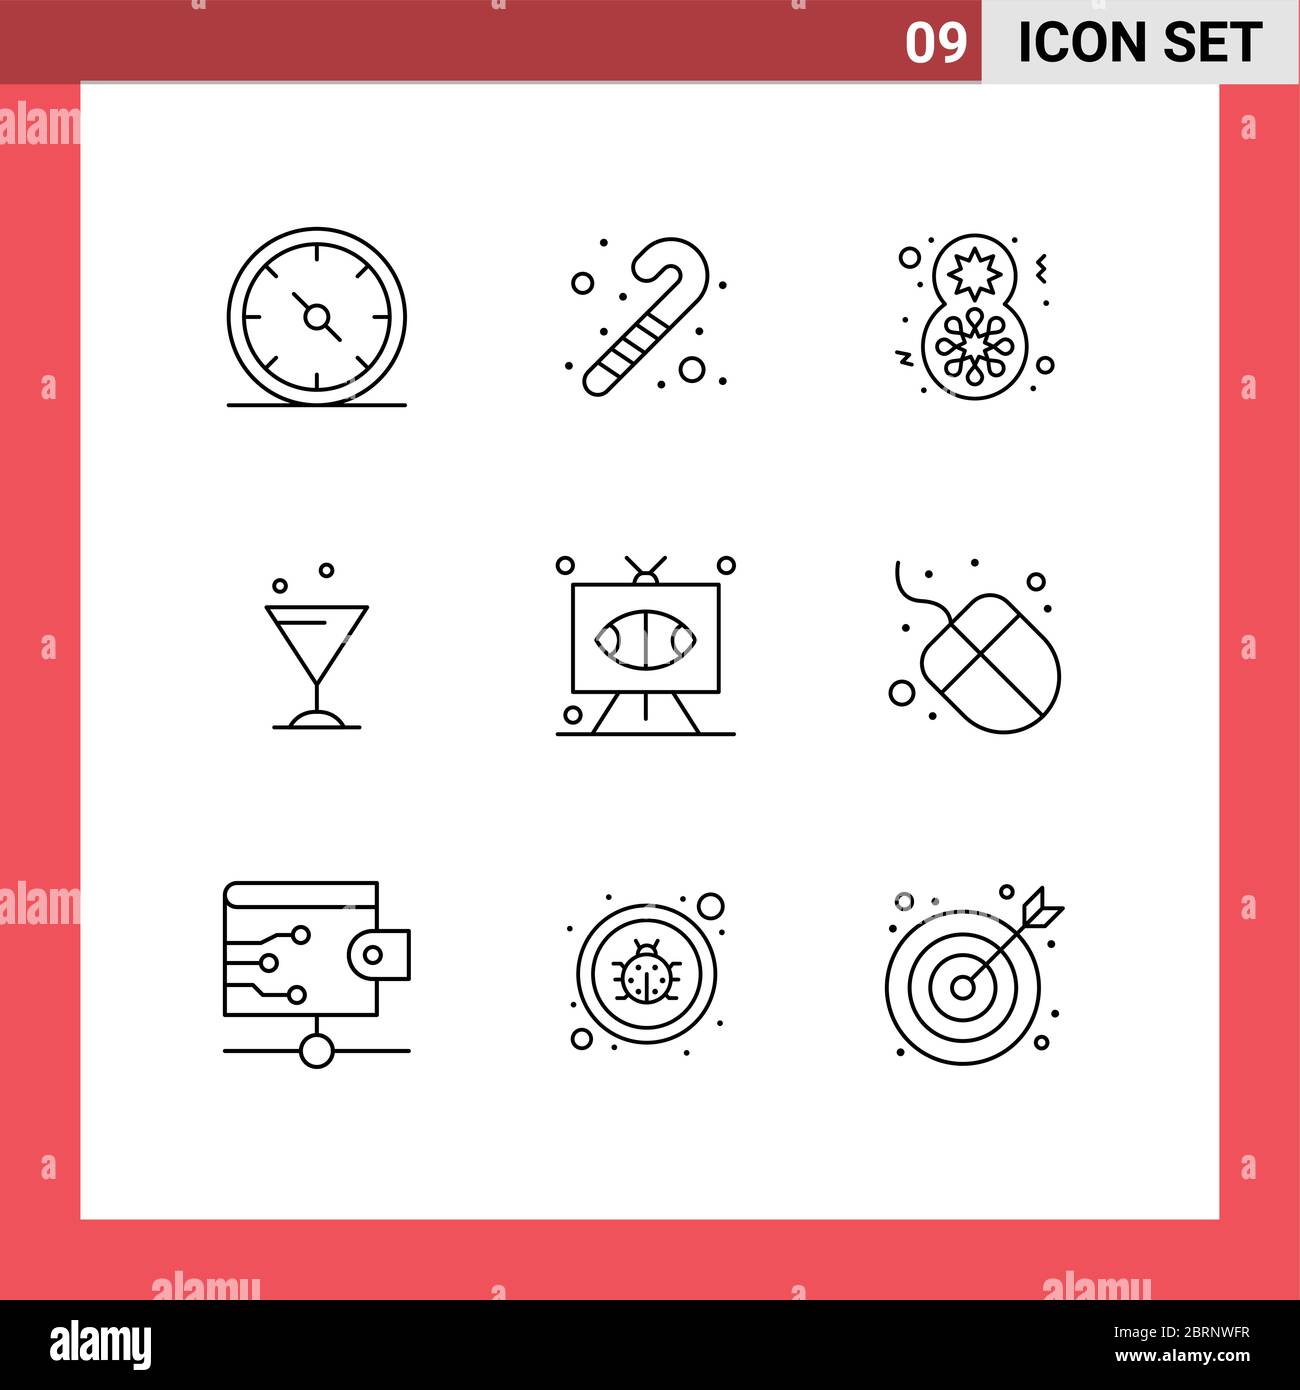 Set of 9 Modern UI Icons Symbols Signs for sports, game, flower, football, drink Editable Vector Design Elements Stock Vector